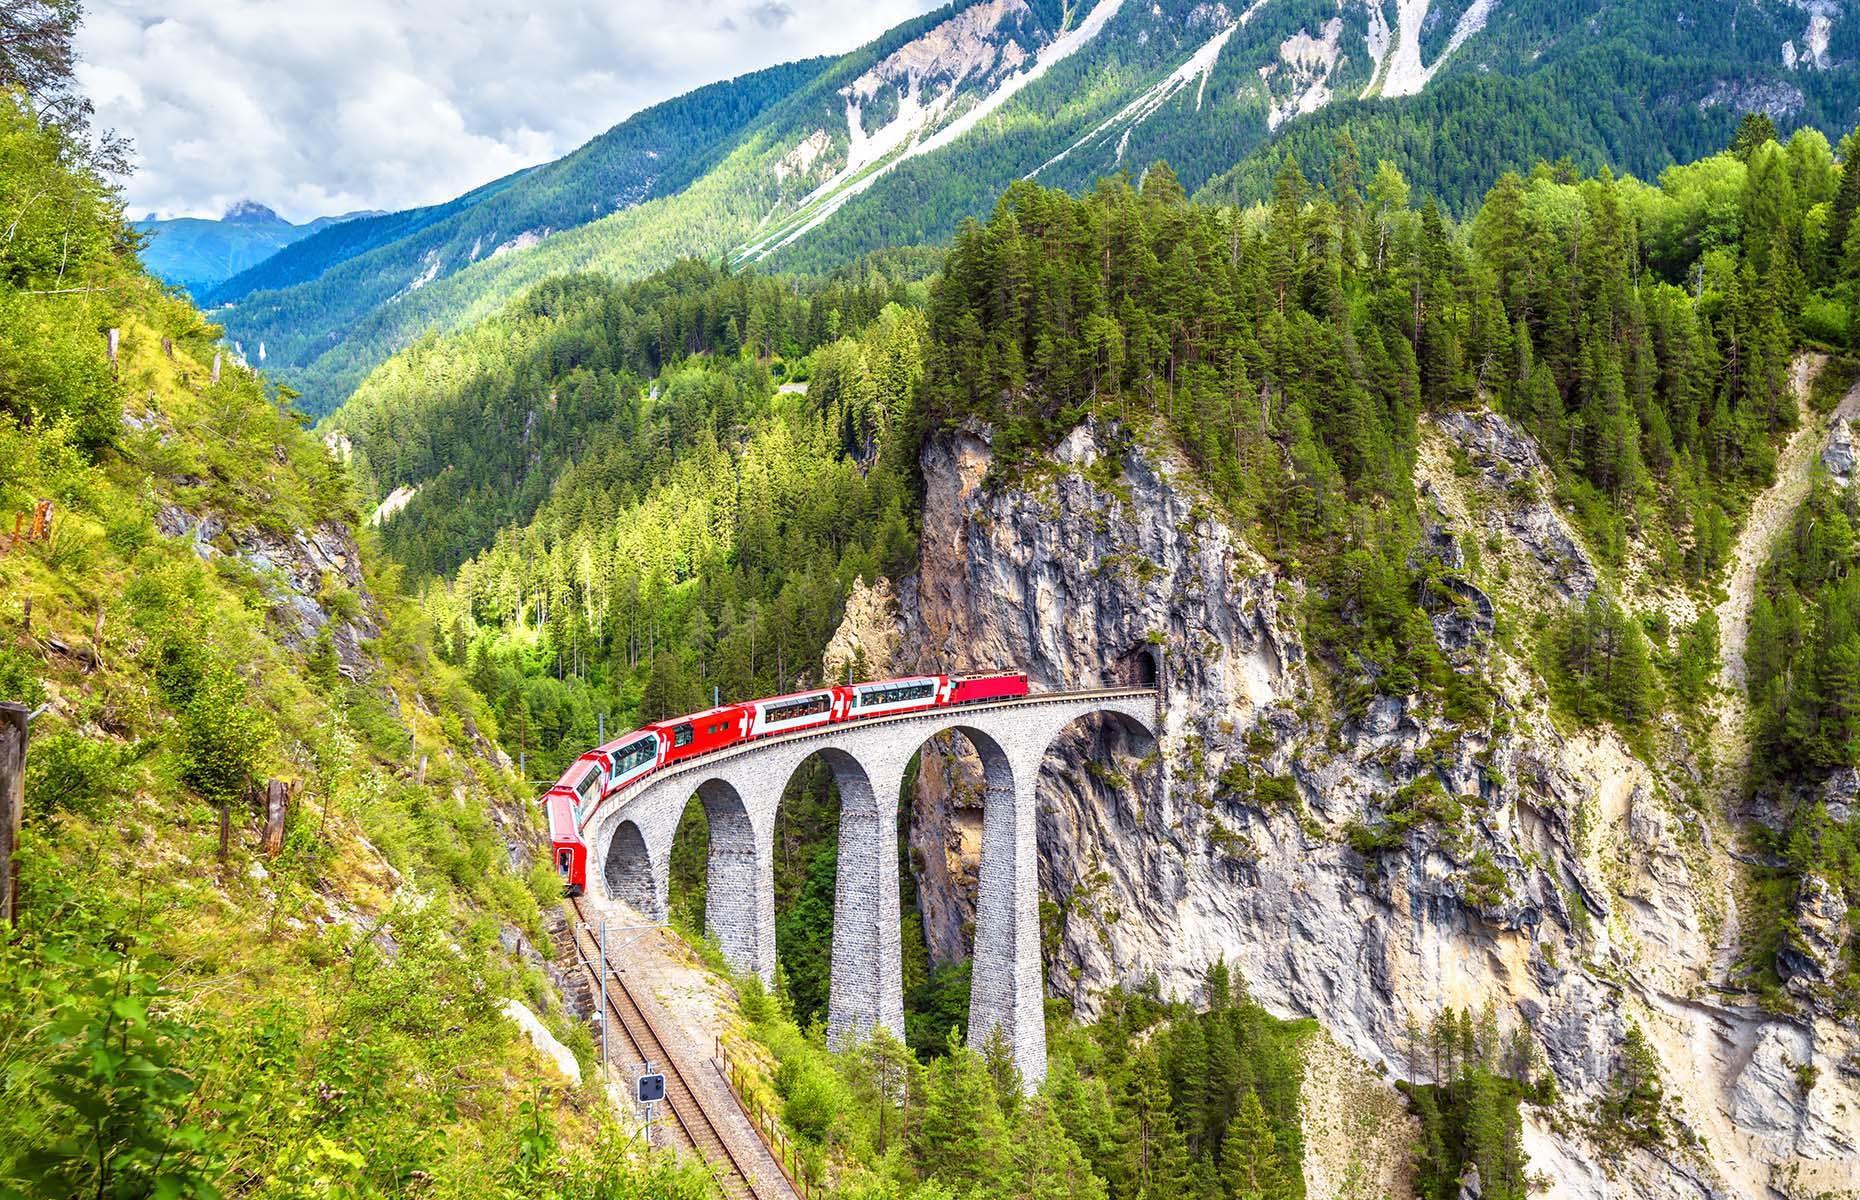 <p>The slowest express service in the world, Switzerland's <a href="https://www.zermatt.ch/en/arrival/Glacier-Express">Glacier Express</a> takes a whooping eight hours to cover a distance of just 181 miles (291km). That's because the scenic route takes in sights like Oberalp Pass, the highest point of the journey, and the Landwasser Viaduct – a six-arch bridge which stands at 213 feet (65m) and plunges straight into a tunnel that leads through the mountain. The day-long trip covers 91 tunnels, 291 bridges and offers the chance to take in stunning alpine meadows, mountain lakes and chalets. </p>